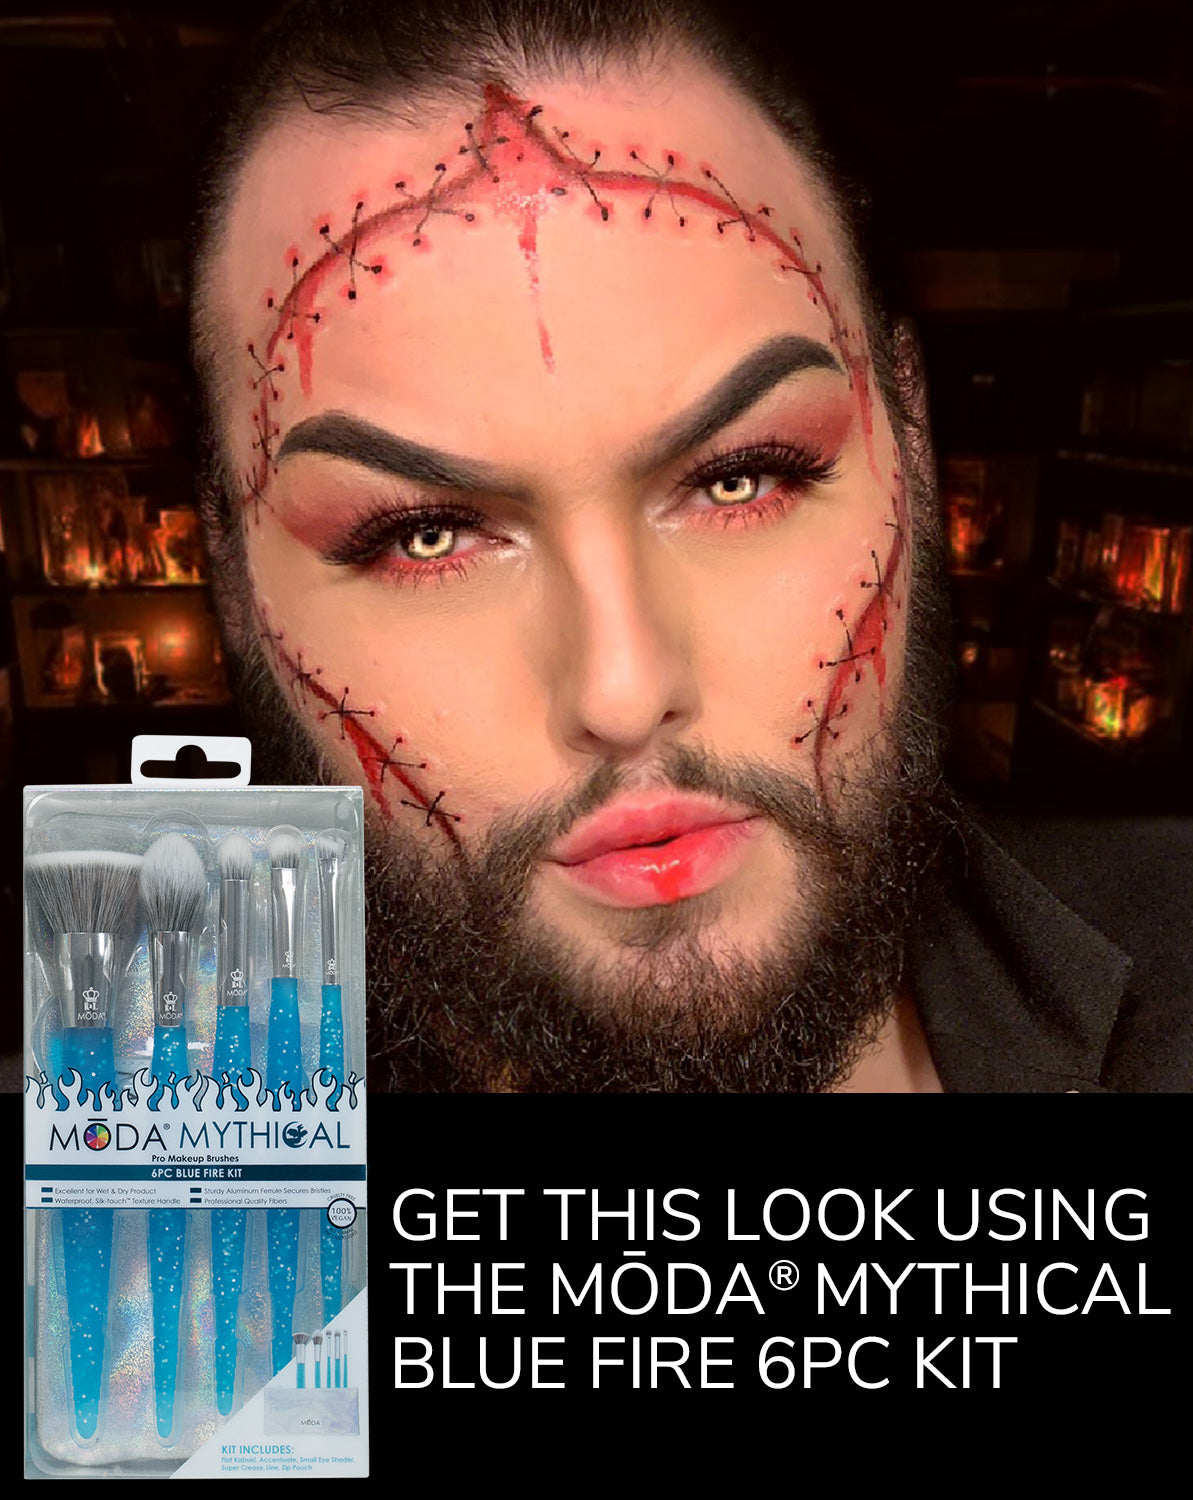 Get this look using the MŌDA® Mythical Blue Fire 6PC Kit!